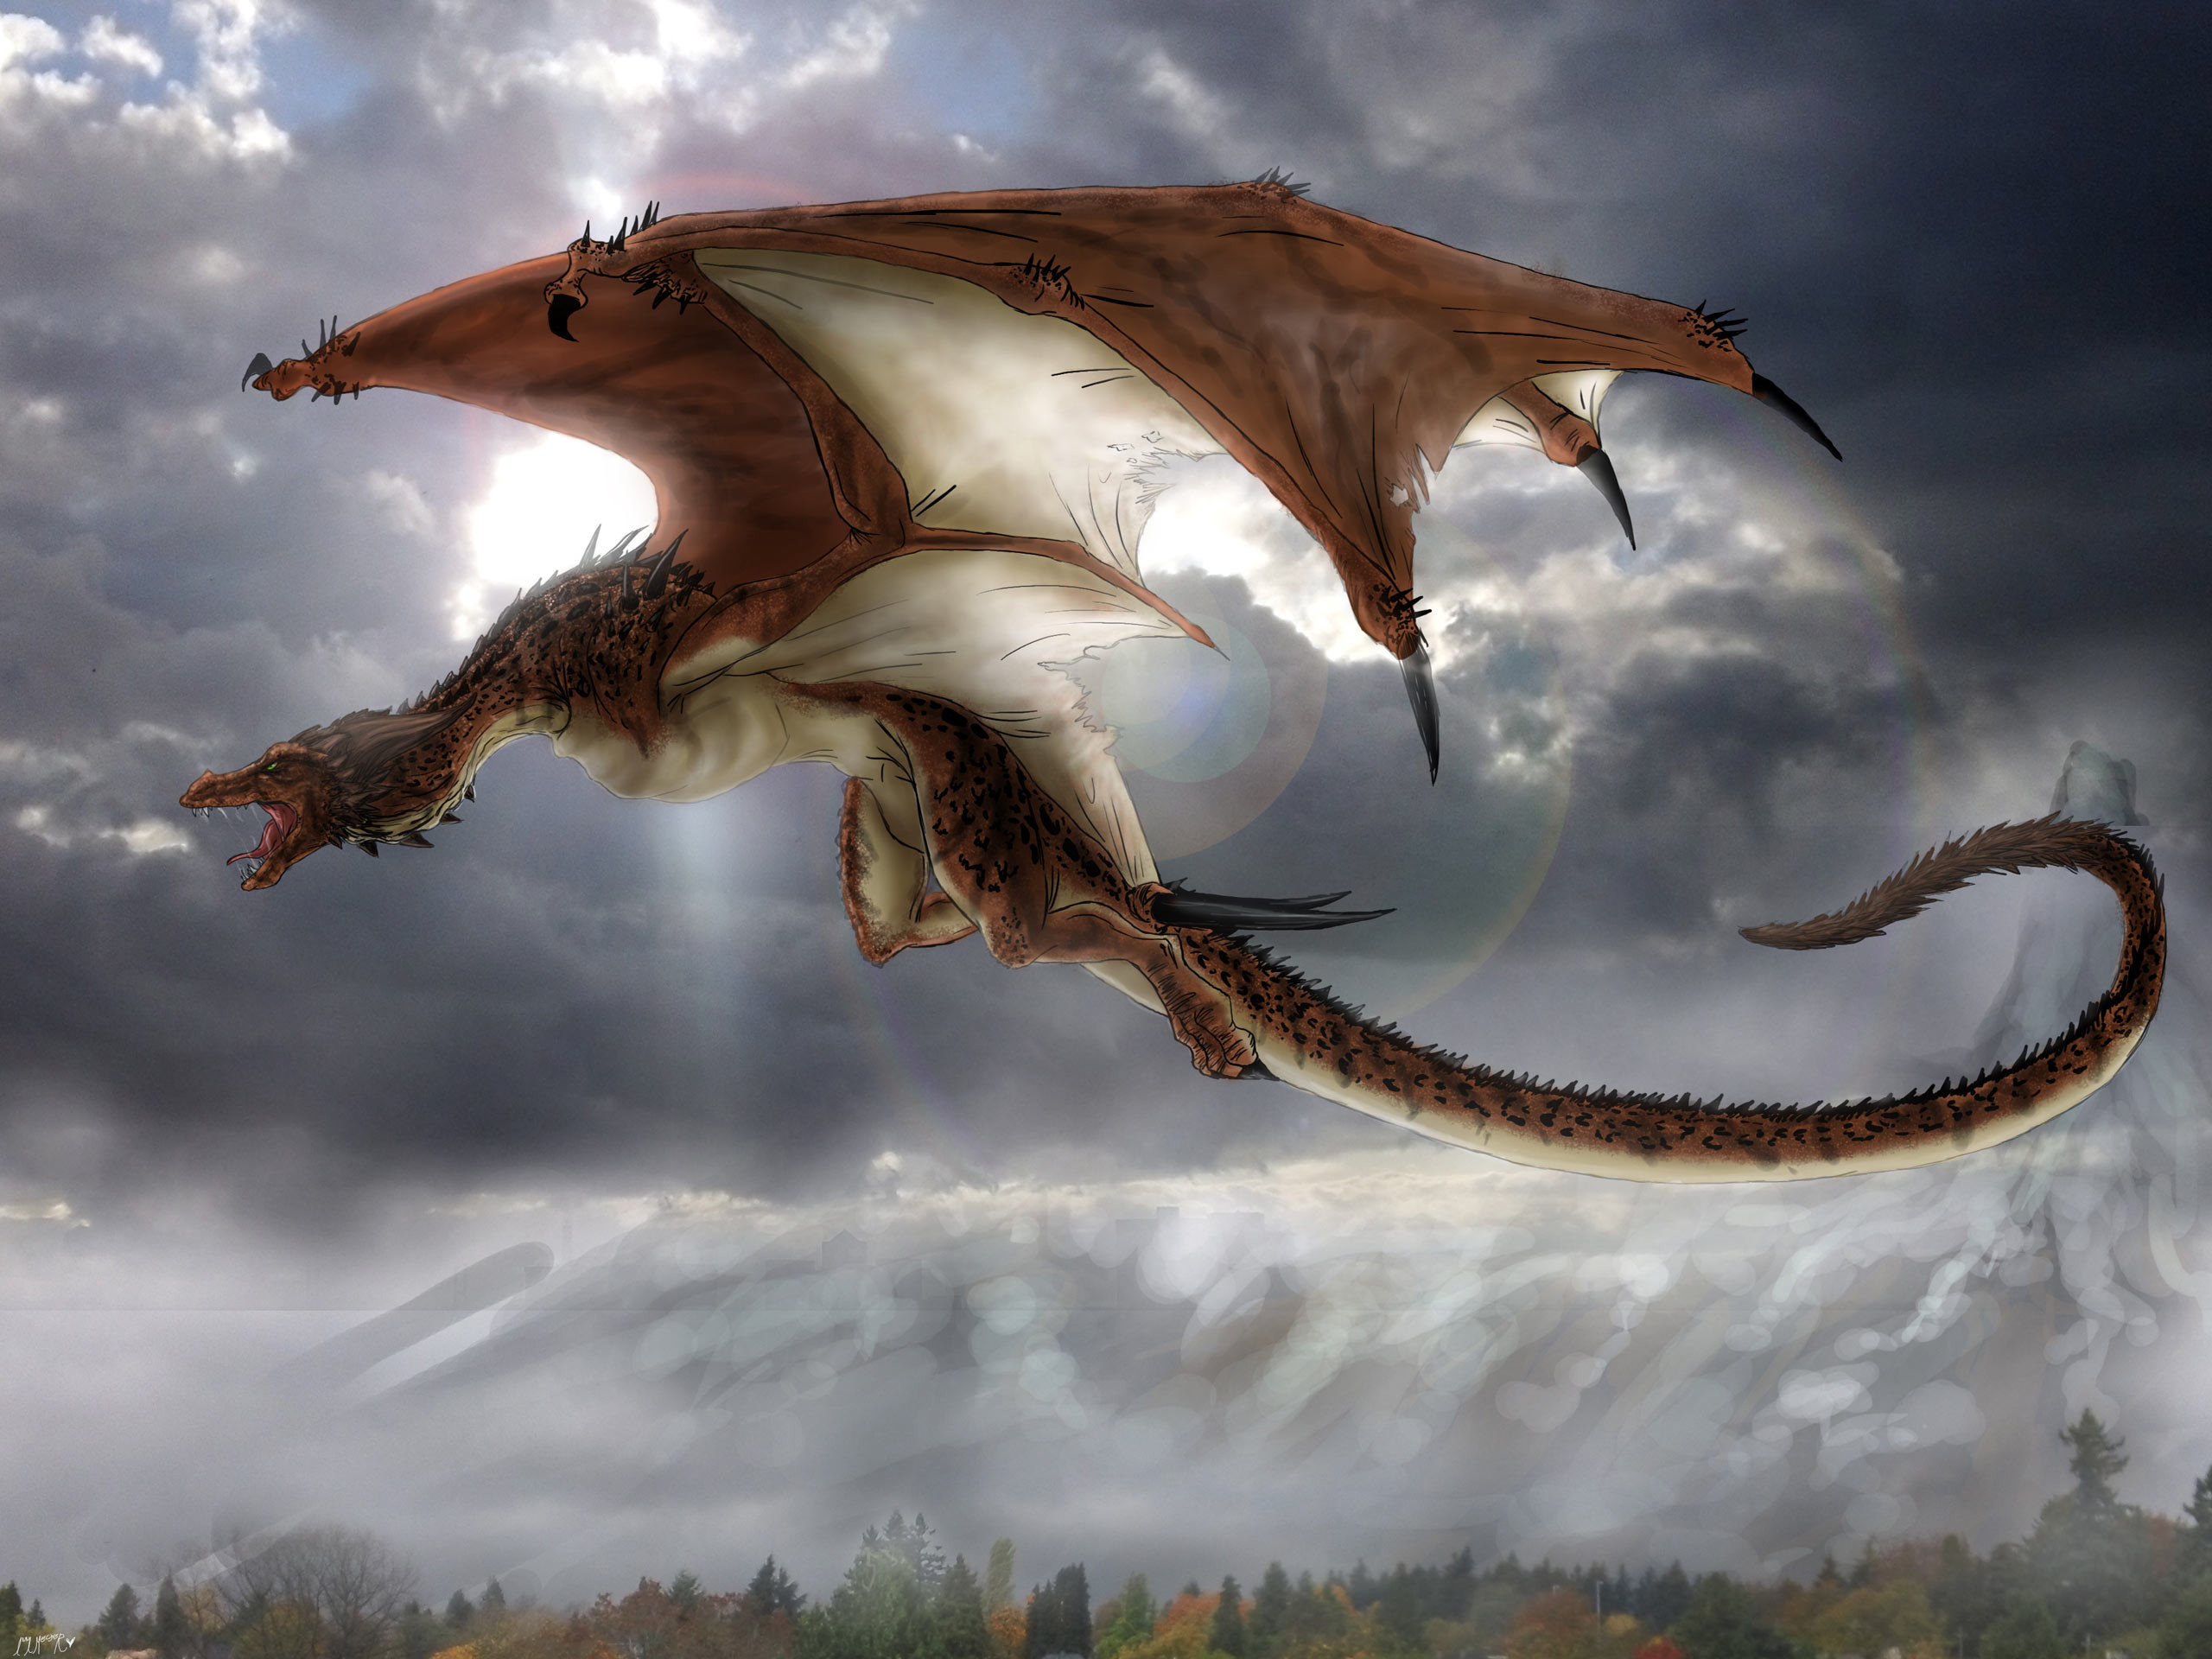 2560x1920 Image detail for -Mythical creatures Dragon